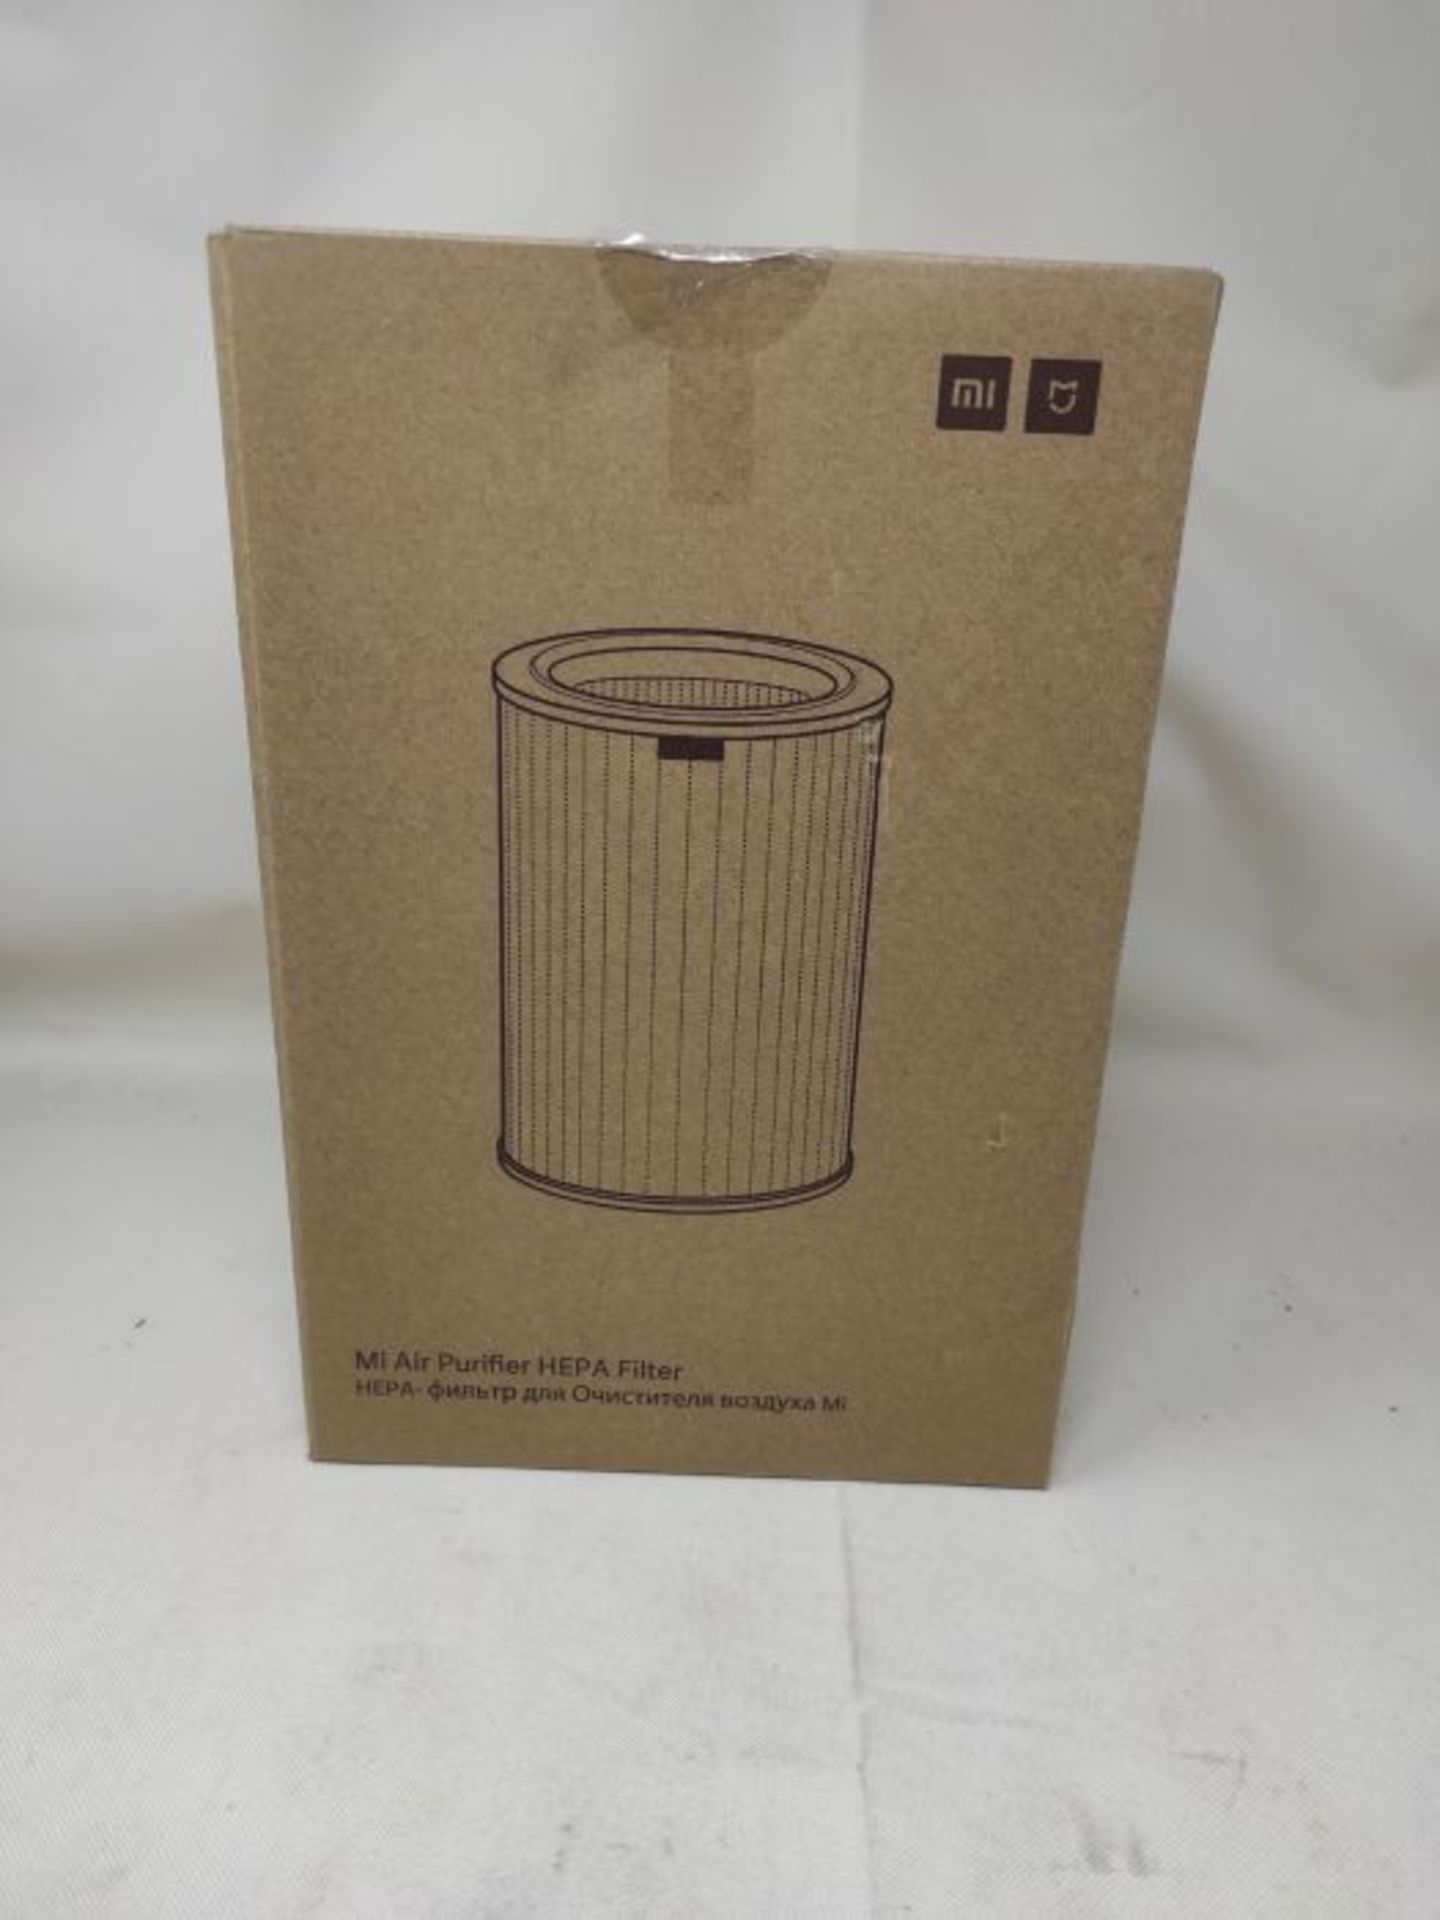 Xiaomi HEPA Filter for Air Purifier, Eliminates 99.97% Particles Small As 0.3 Micro, C - Image 2 of 3